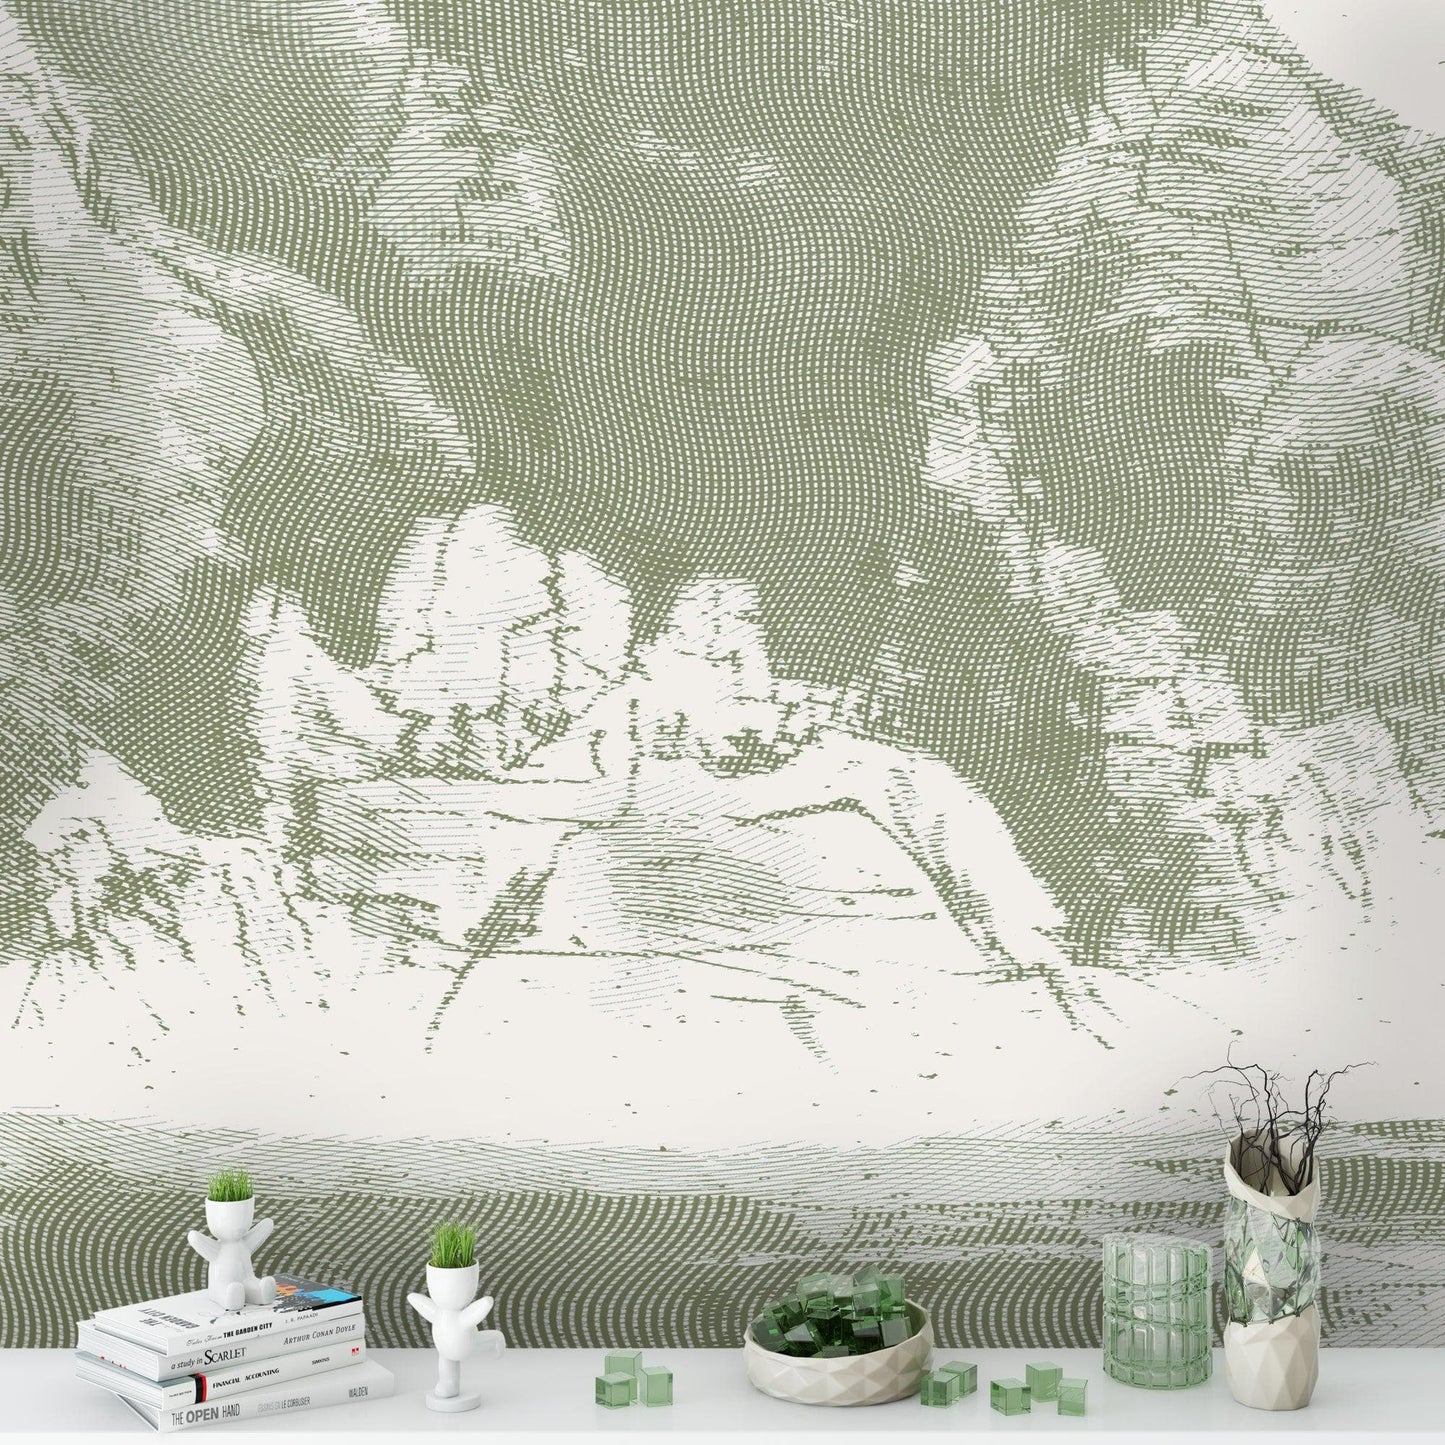 Shan Shui Traditional Chinese Mountain Landscape Scenery Painting Wall Mural. #6178